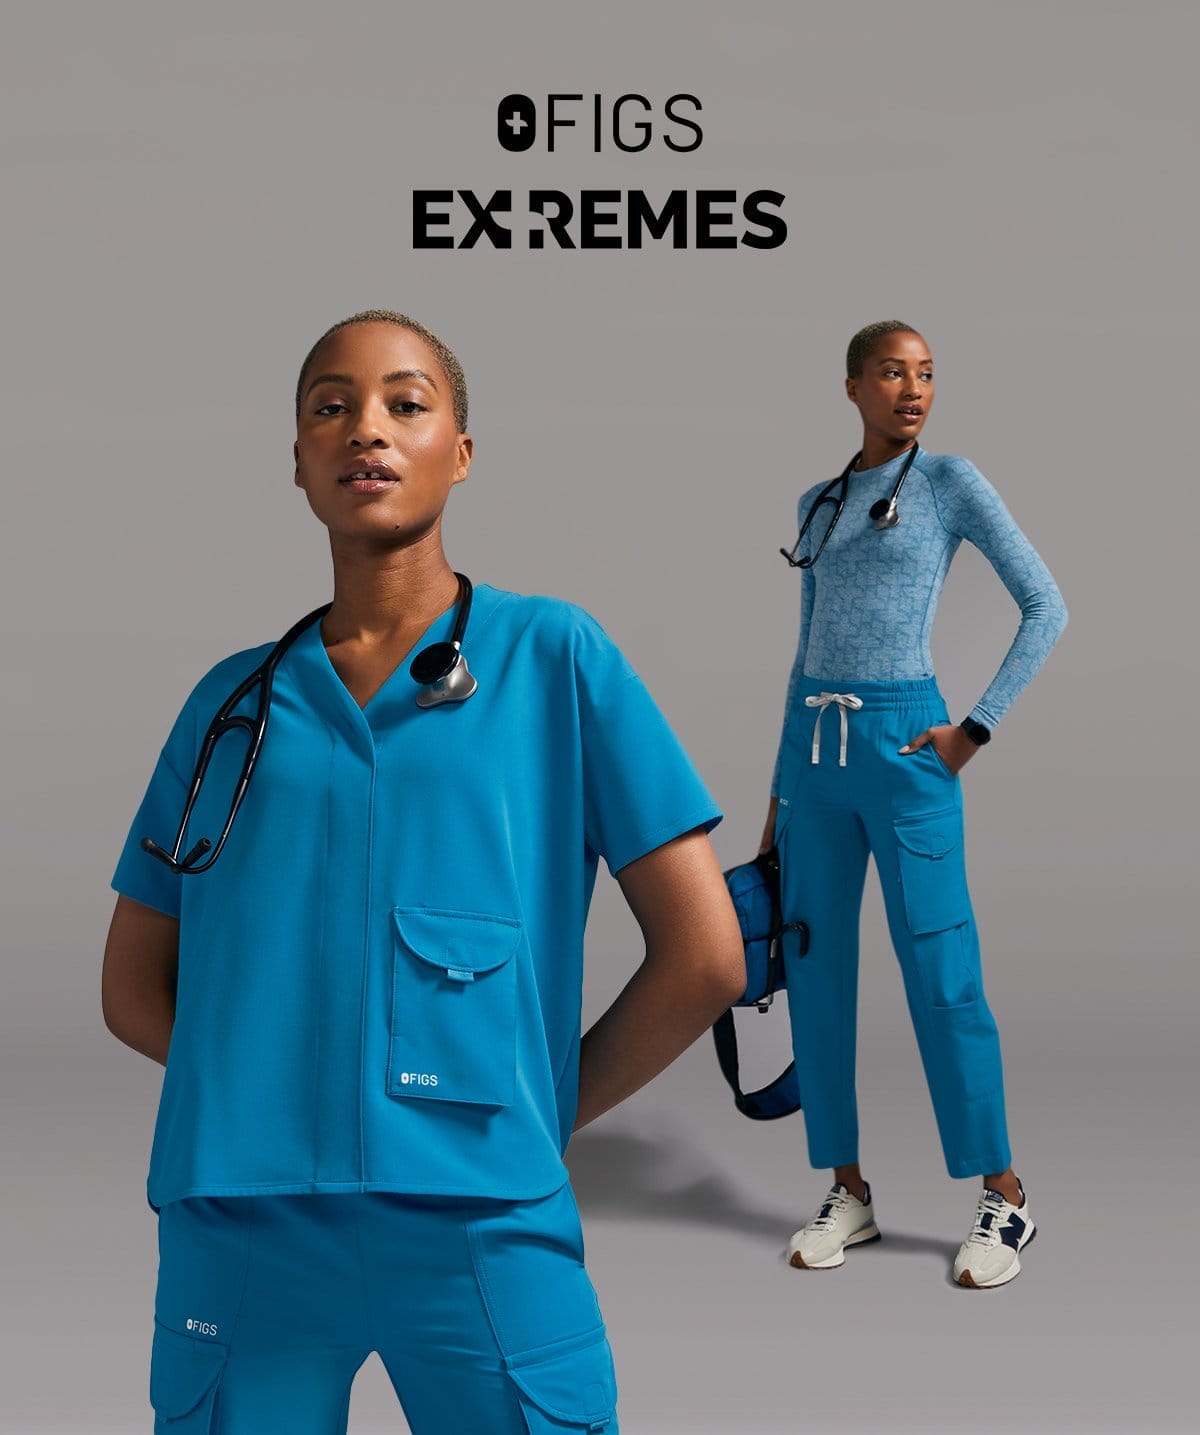 New limited edition styles are in with ultimate pocket placements. Because there’s nothing more extreme than needing a pocket for your syringe, stethoscope, snacks…